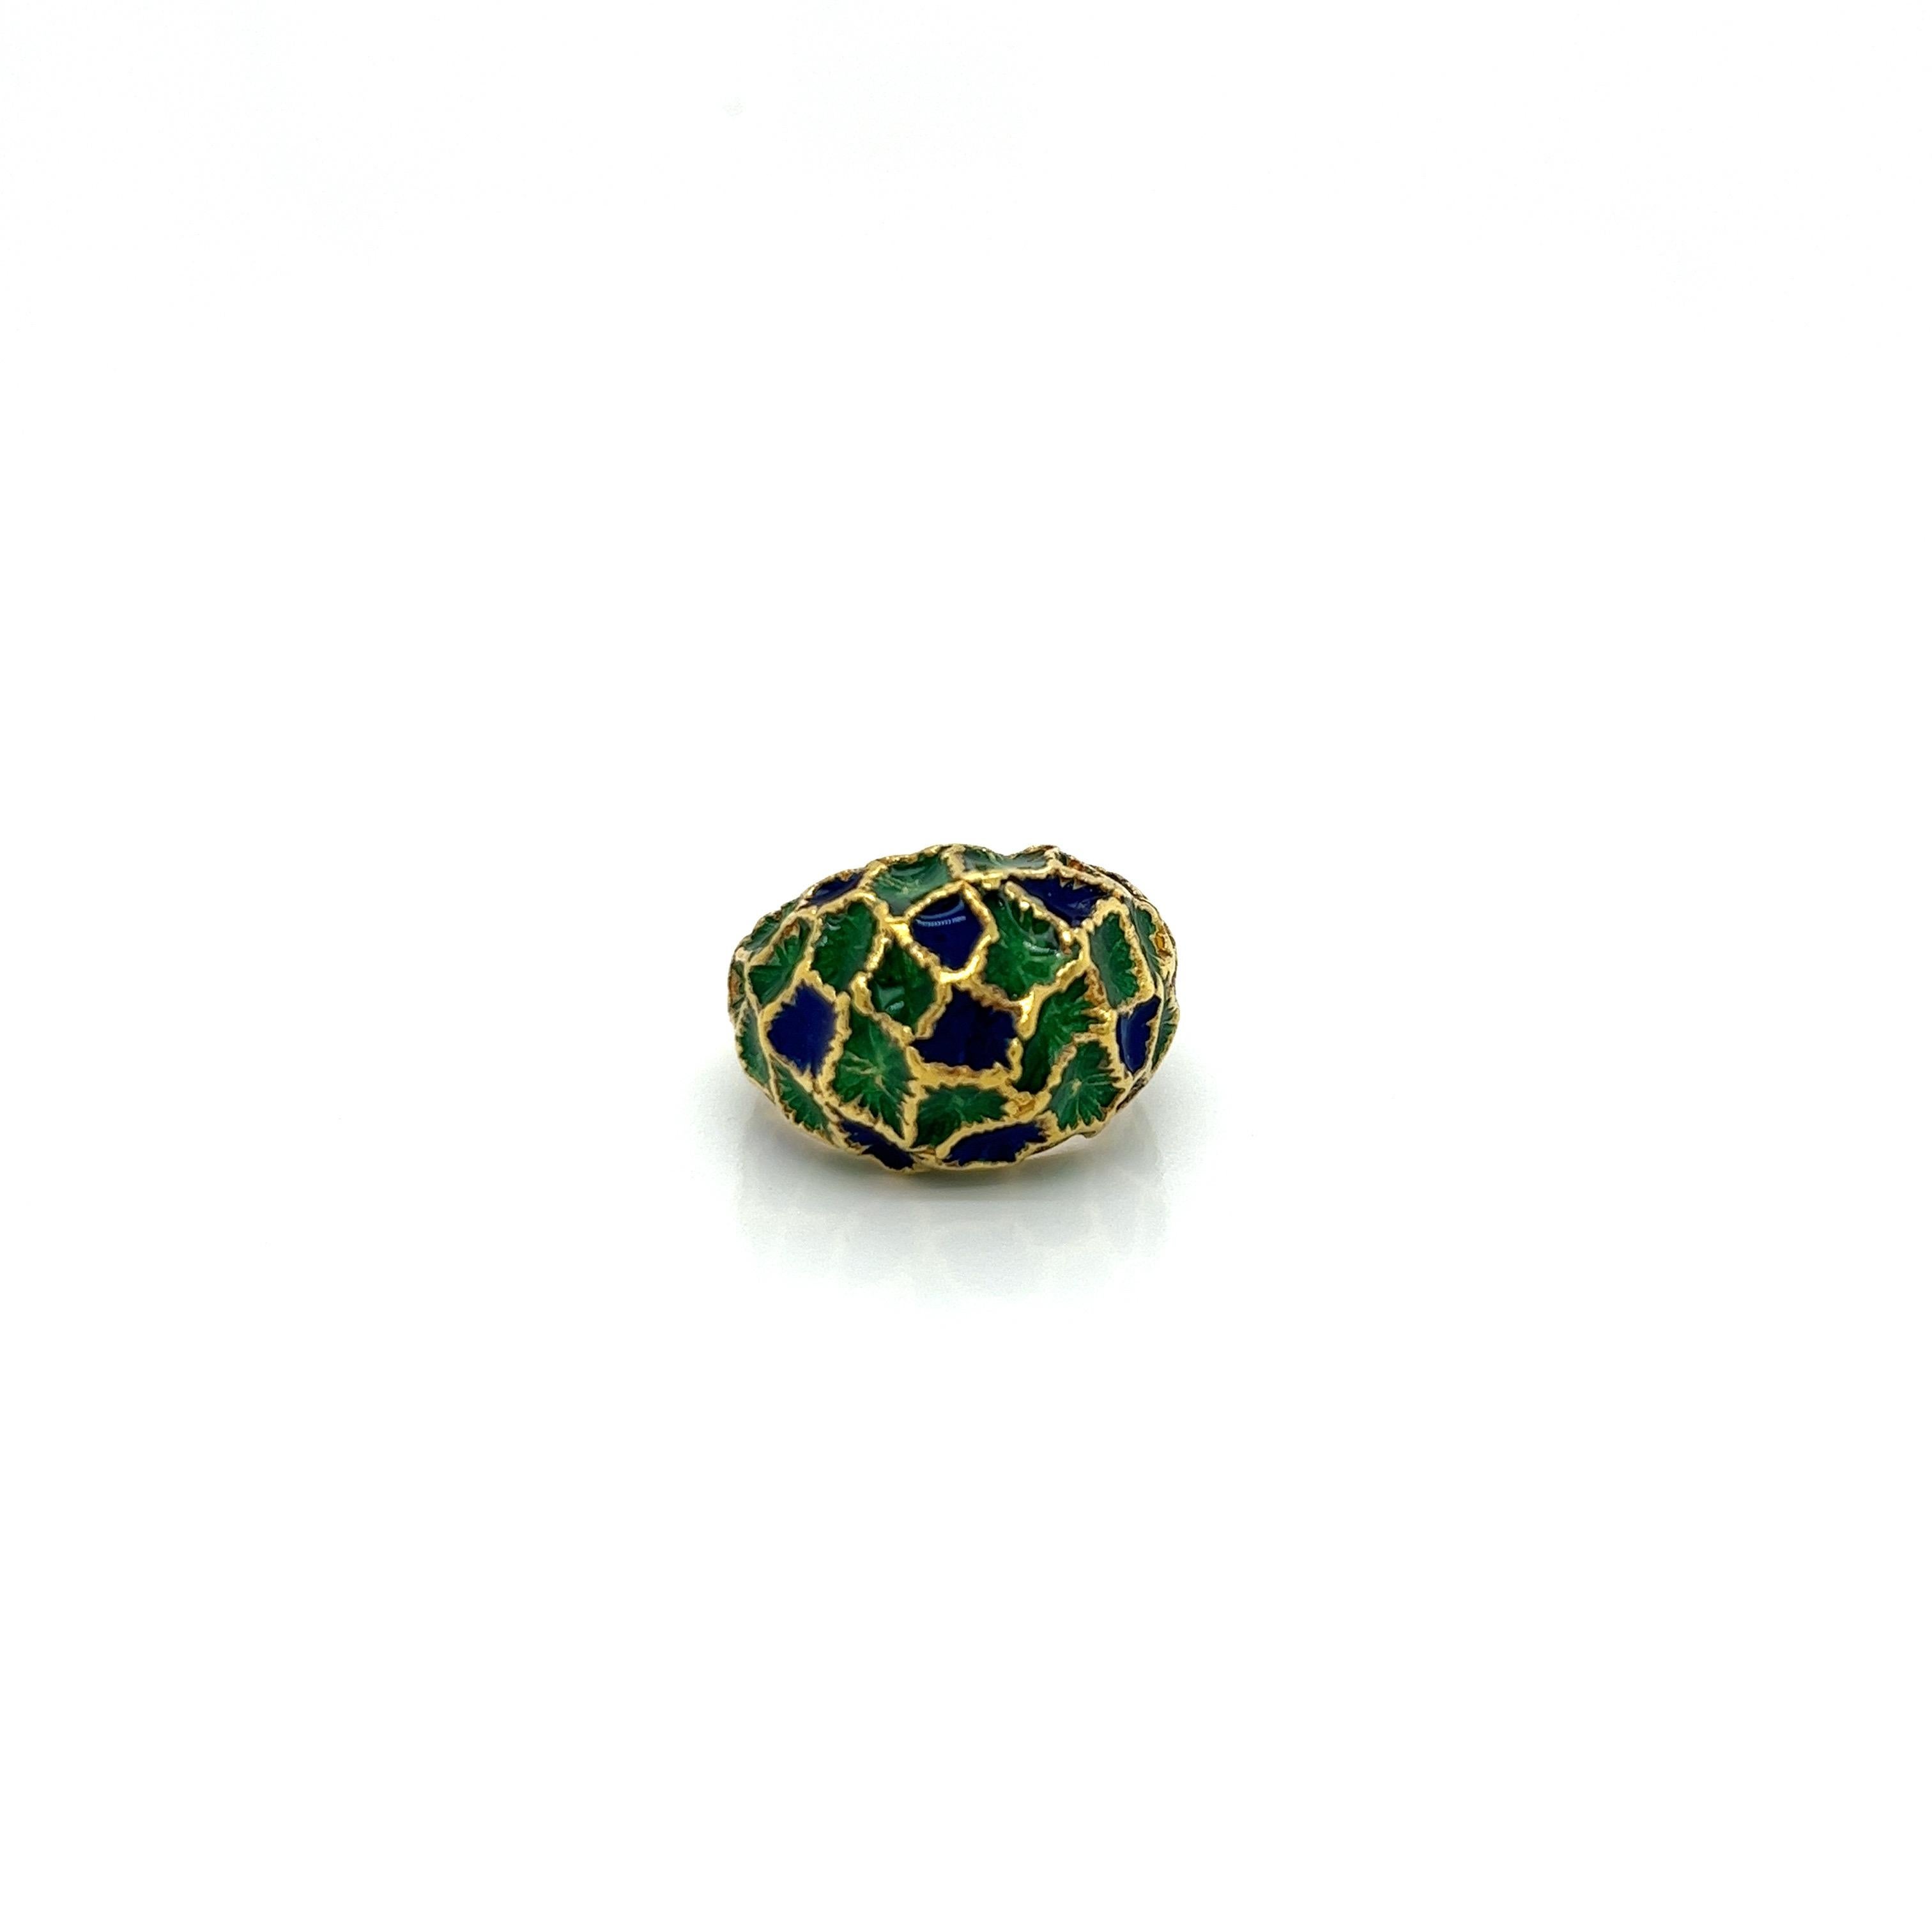 This showstopping cocktail ring is a vibrant and sculptural piece from the 1960s. Crafted in rich 18 karat yellow gold, it features a boldly domed design at the center. The dome is coated in a striking combination of blue and green enamel in a